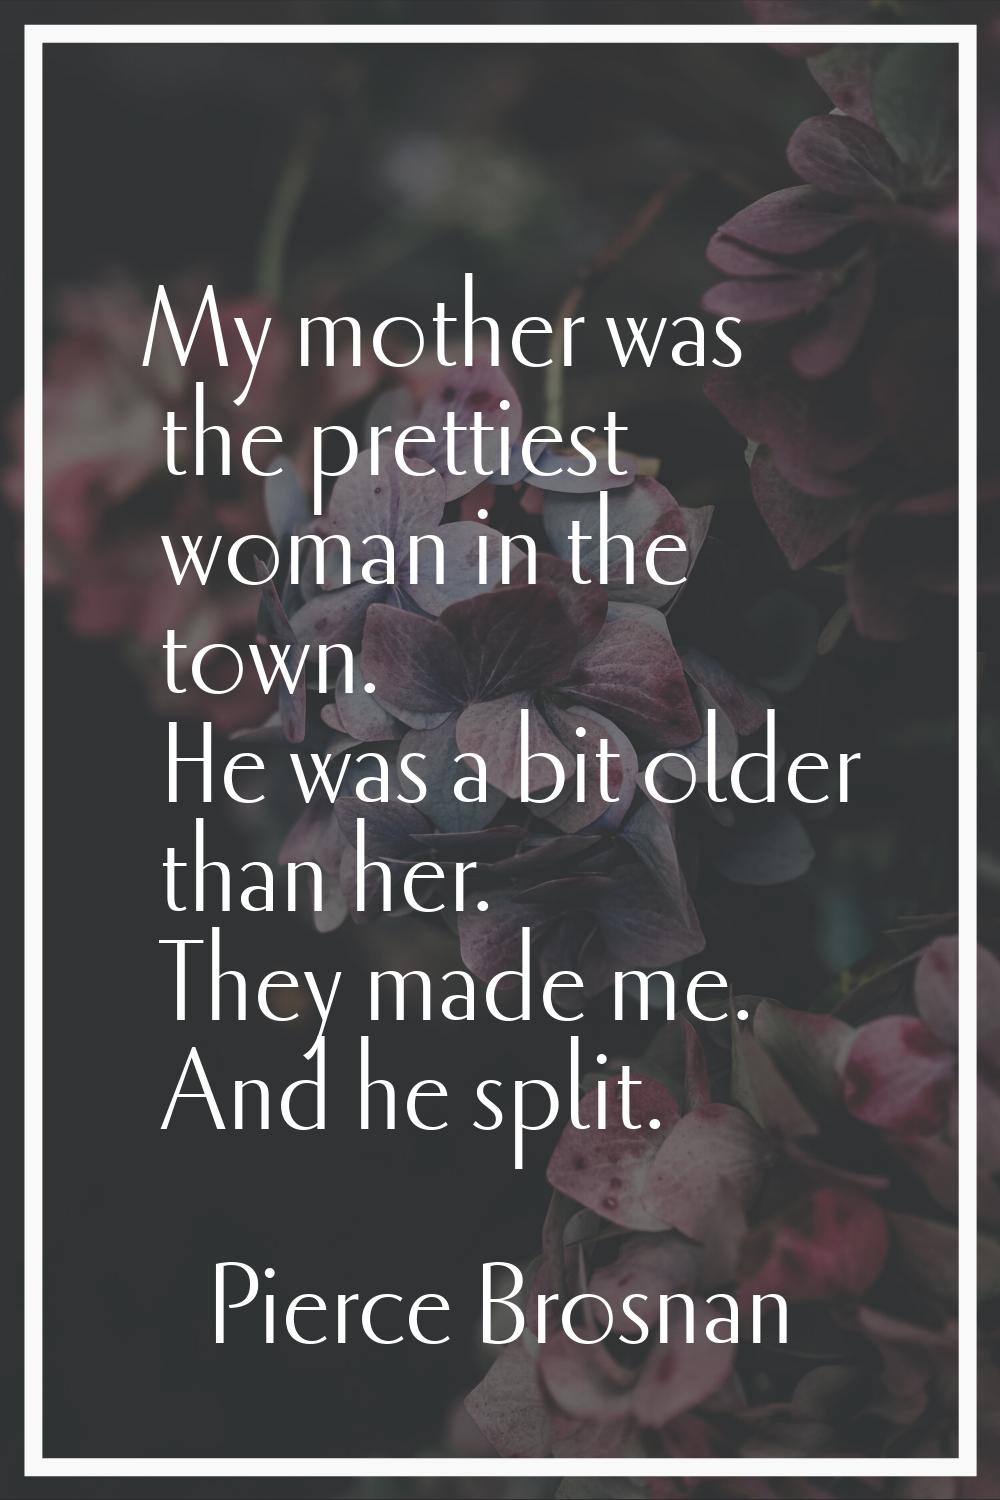 My mother was the prettiest woman in the town. He was a bit older than her. They made me. And he sp